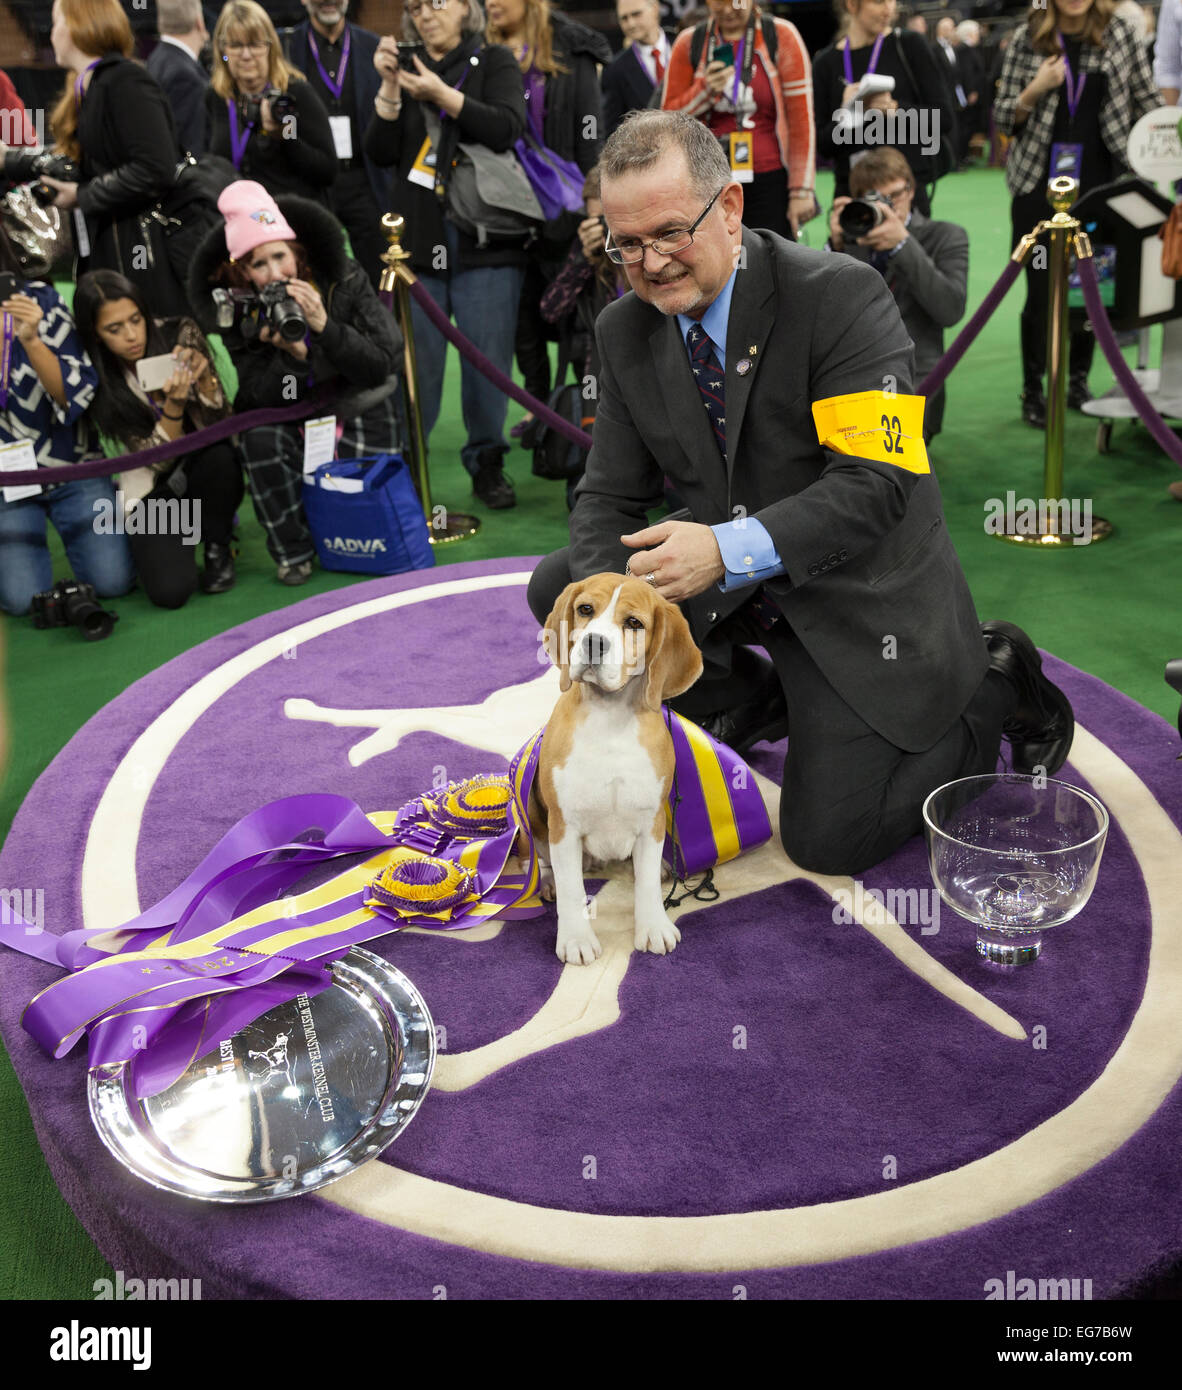 New York, NY - February 17, 2015: Best of Show Hound 15 inch Beagle Miss P poses with handler William Alexandre at 139 Westminster Kennel Club dog show at Madison Square Garden Stock Photo